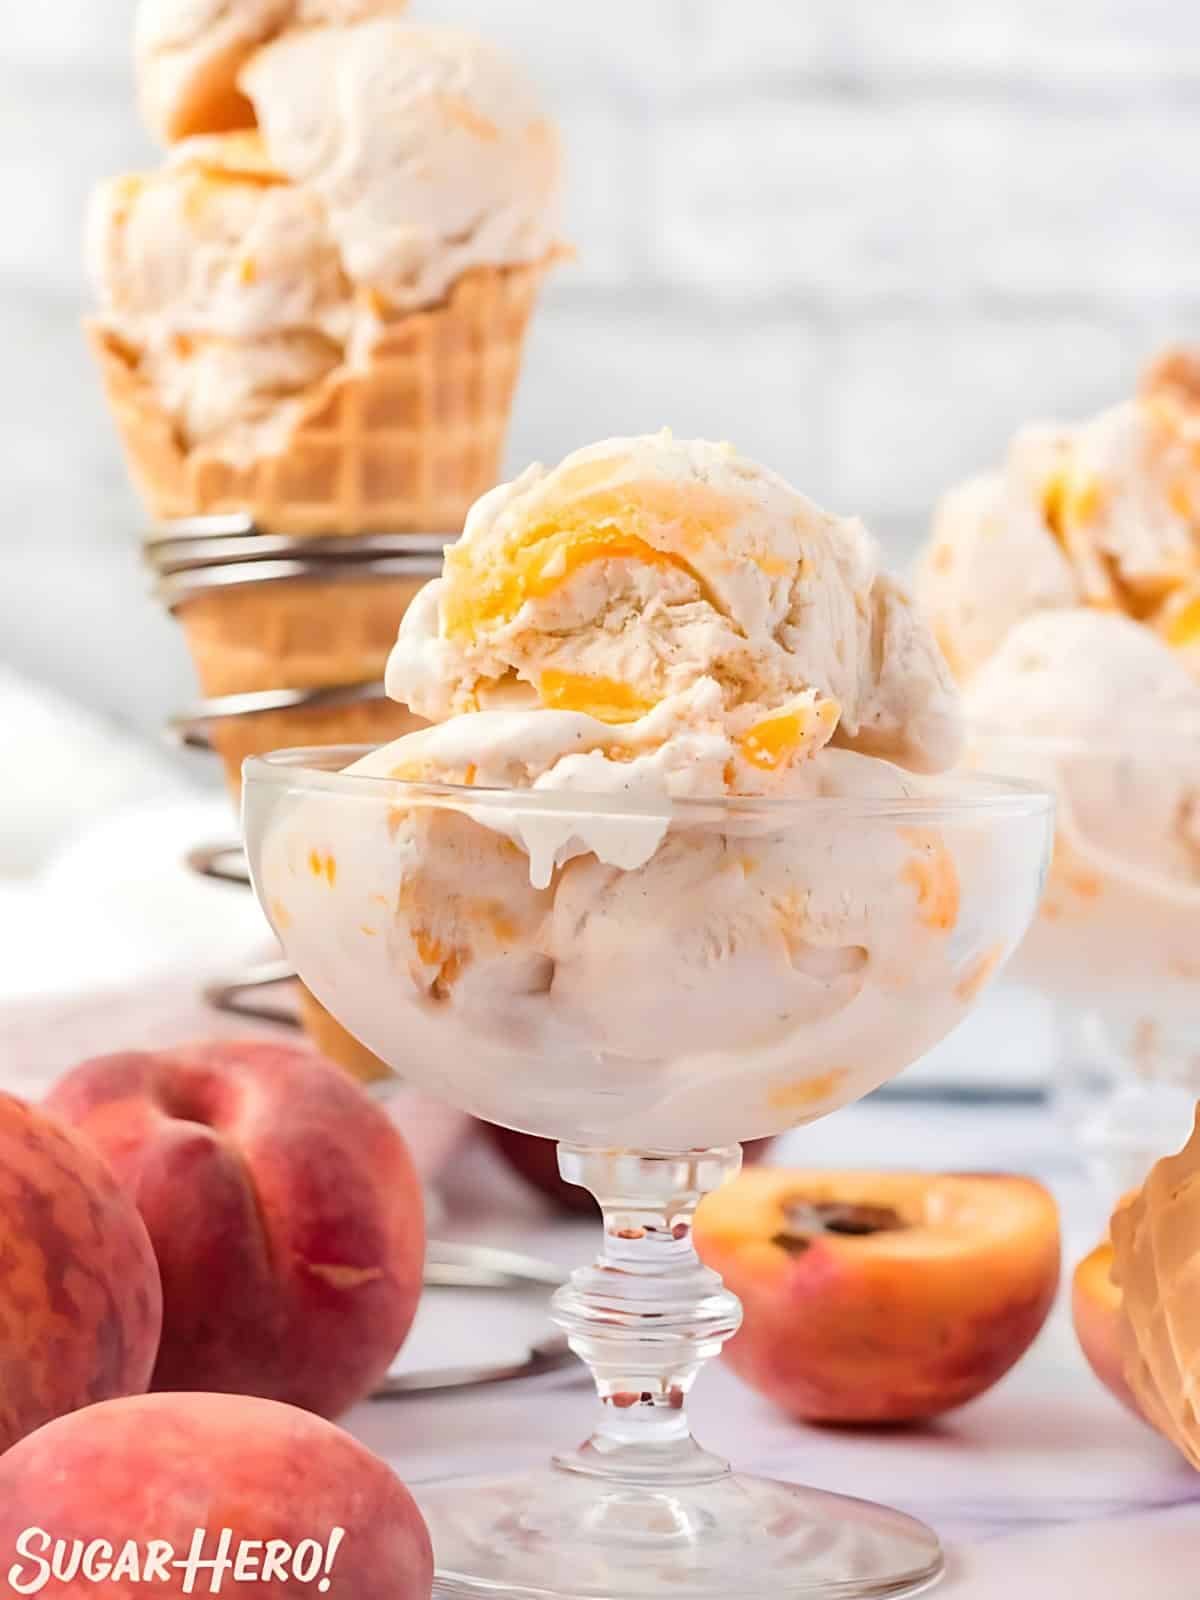 Peach ice cream in a glass cup with fresh slices of peaches.